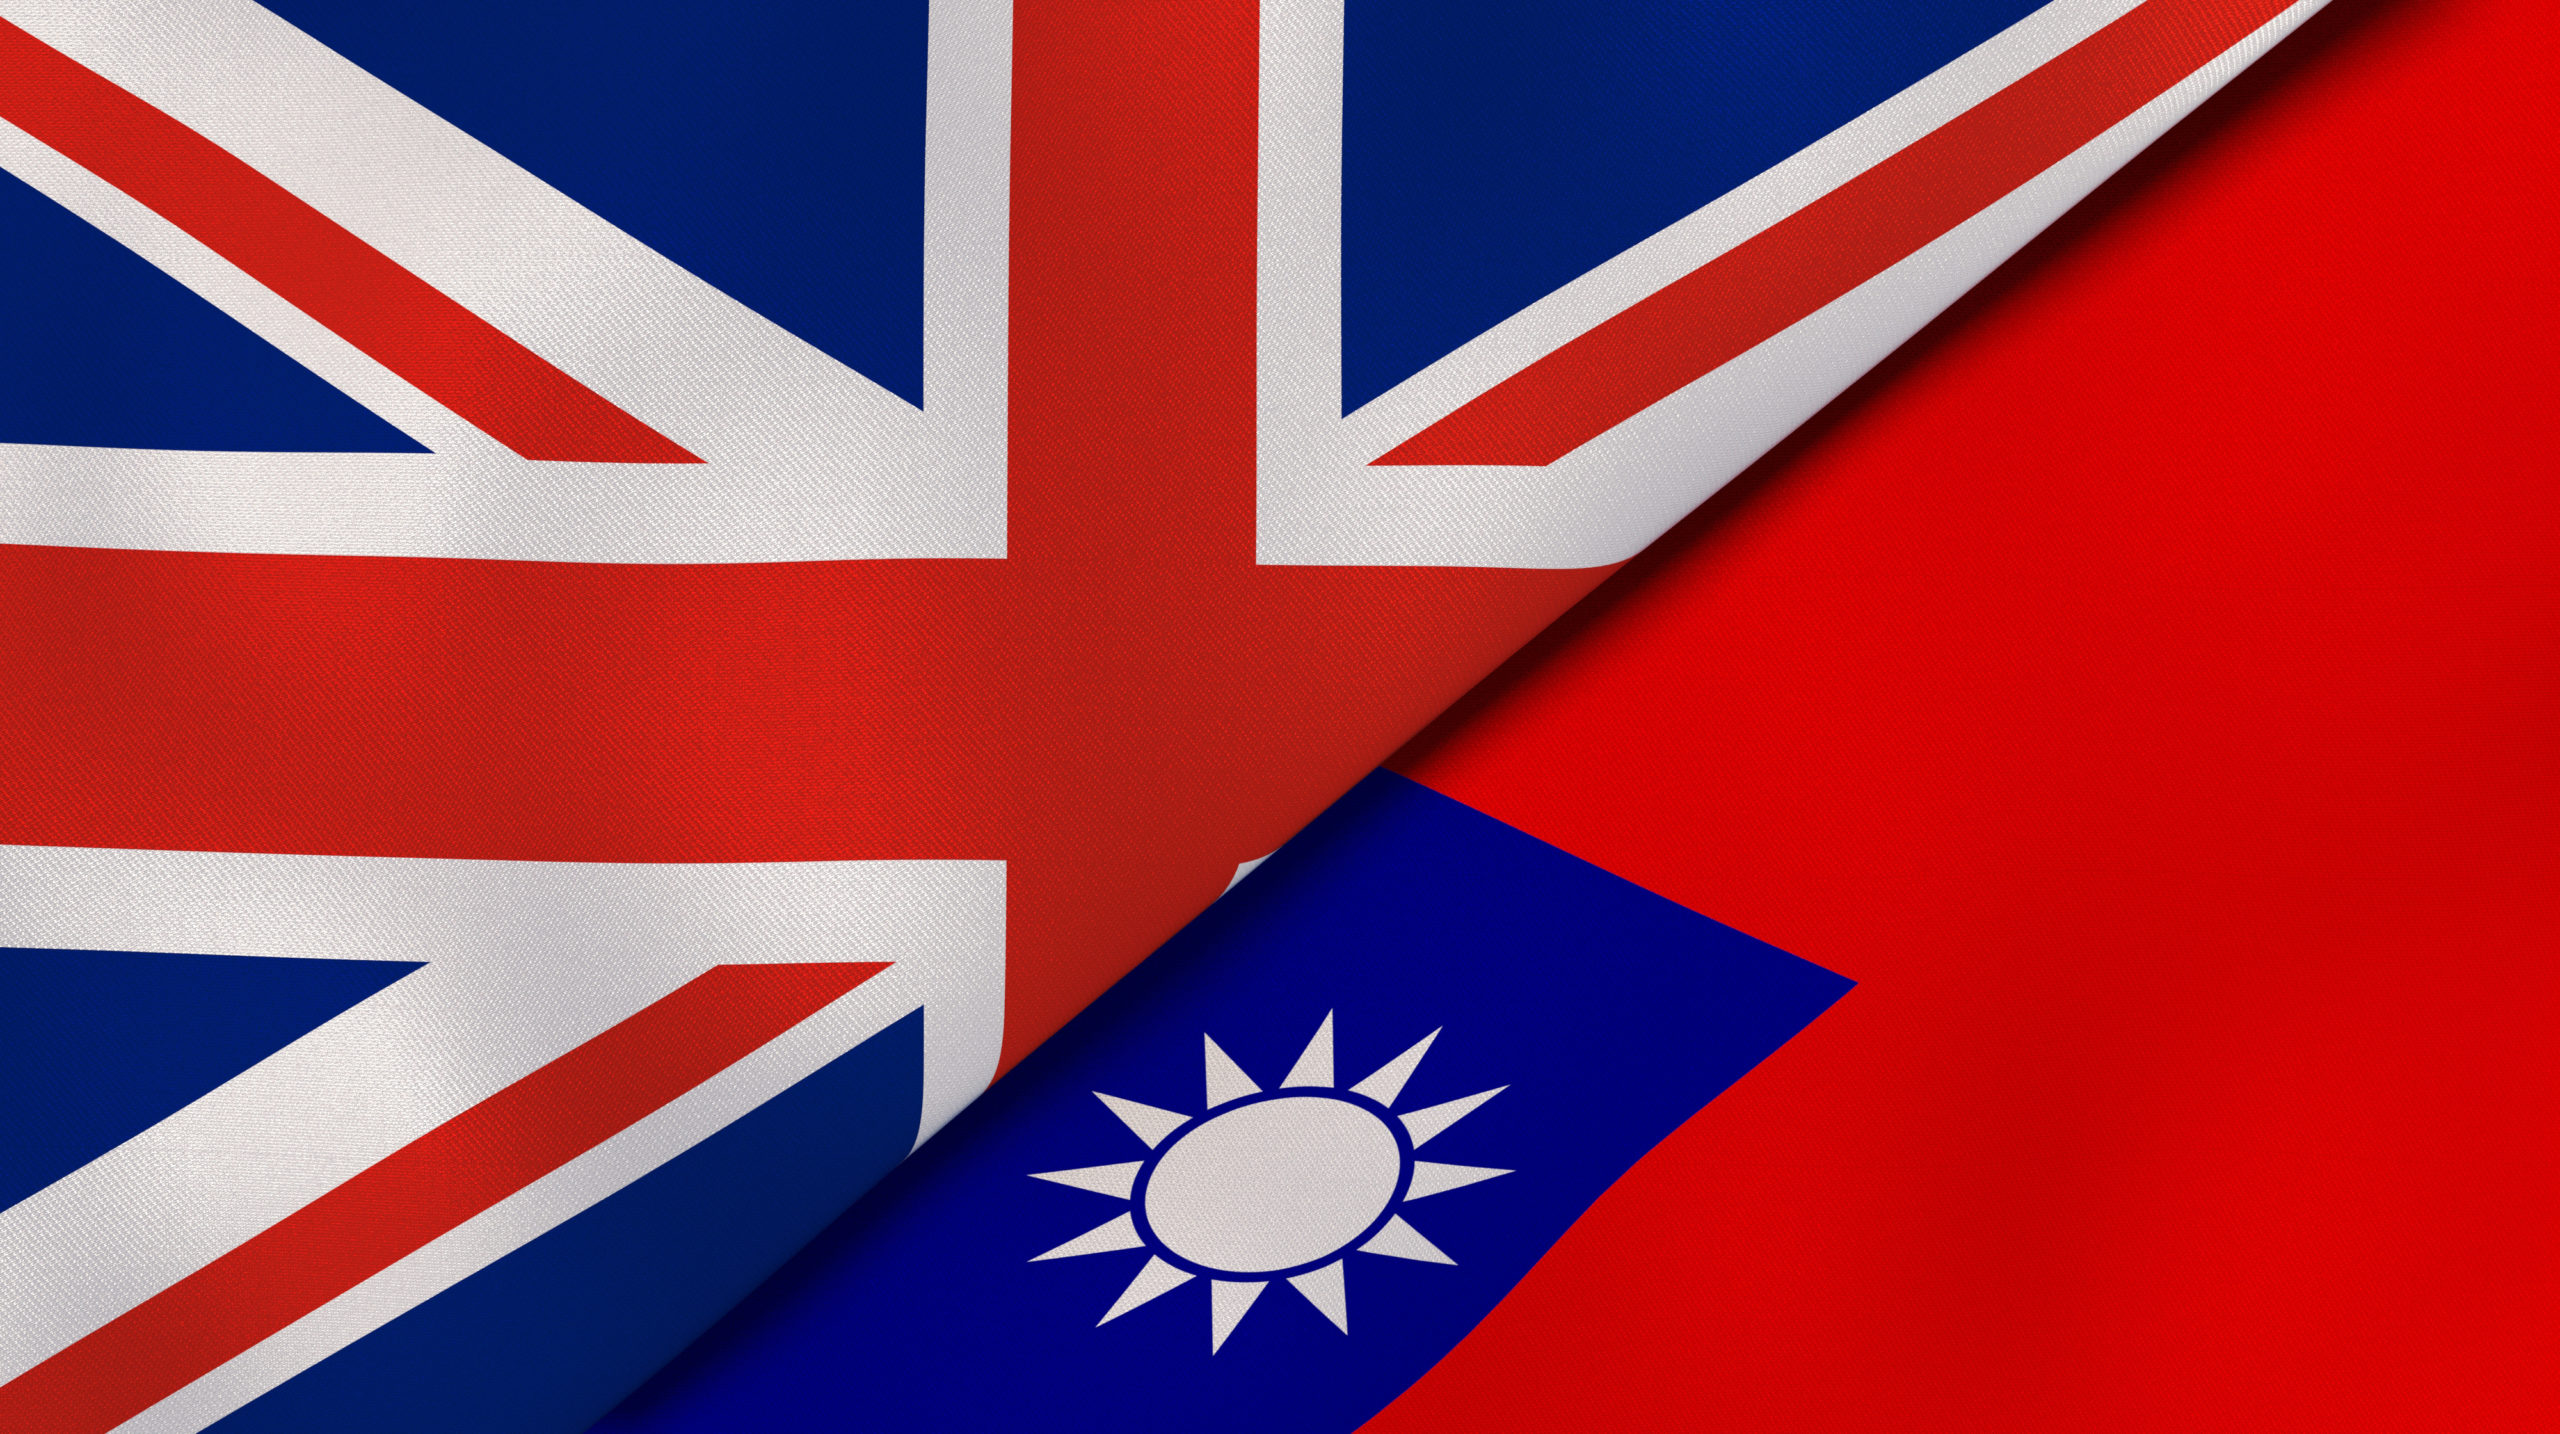 Follow Innovate UK on the latest Global Expert Mission in Health Technology to Taiwan